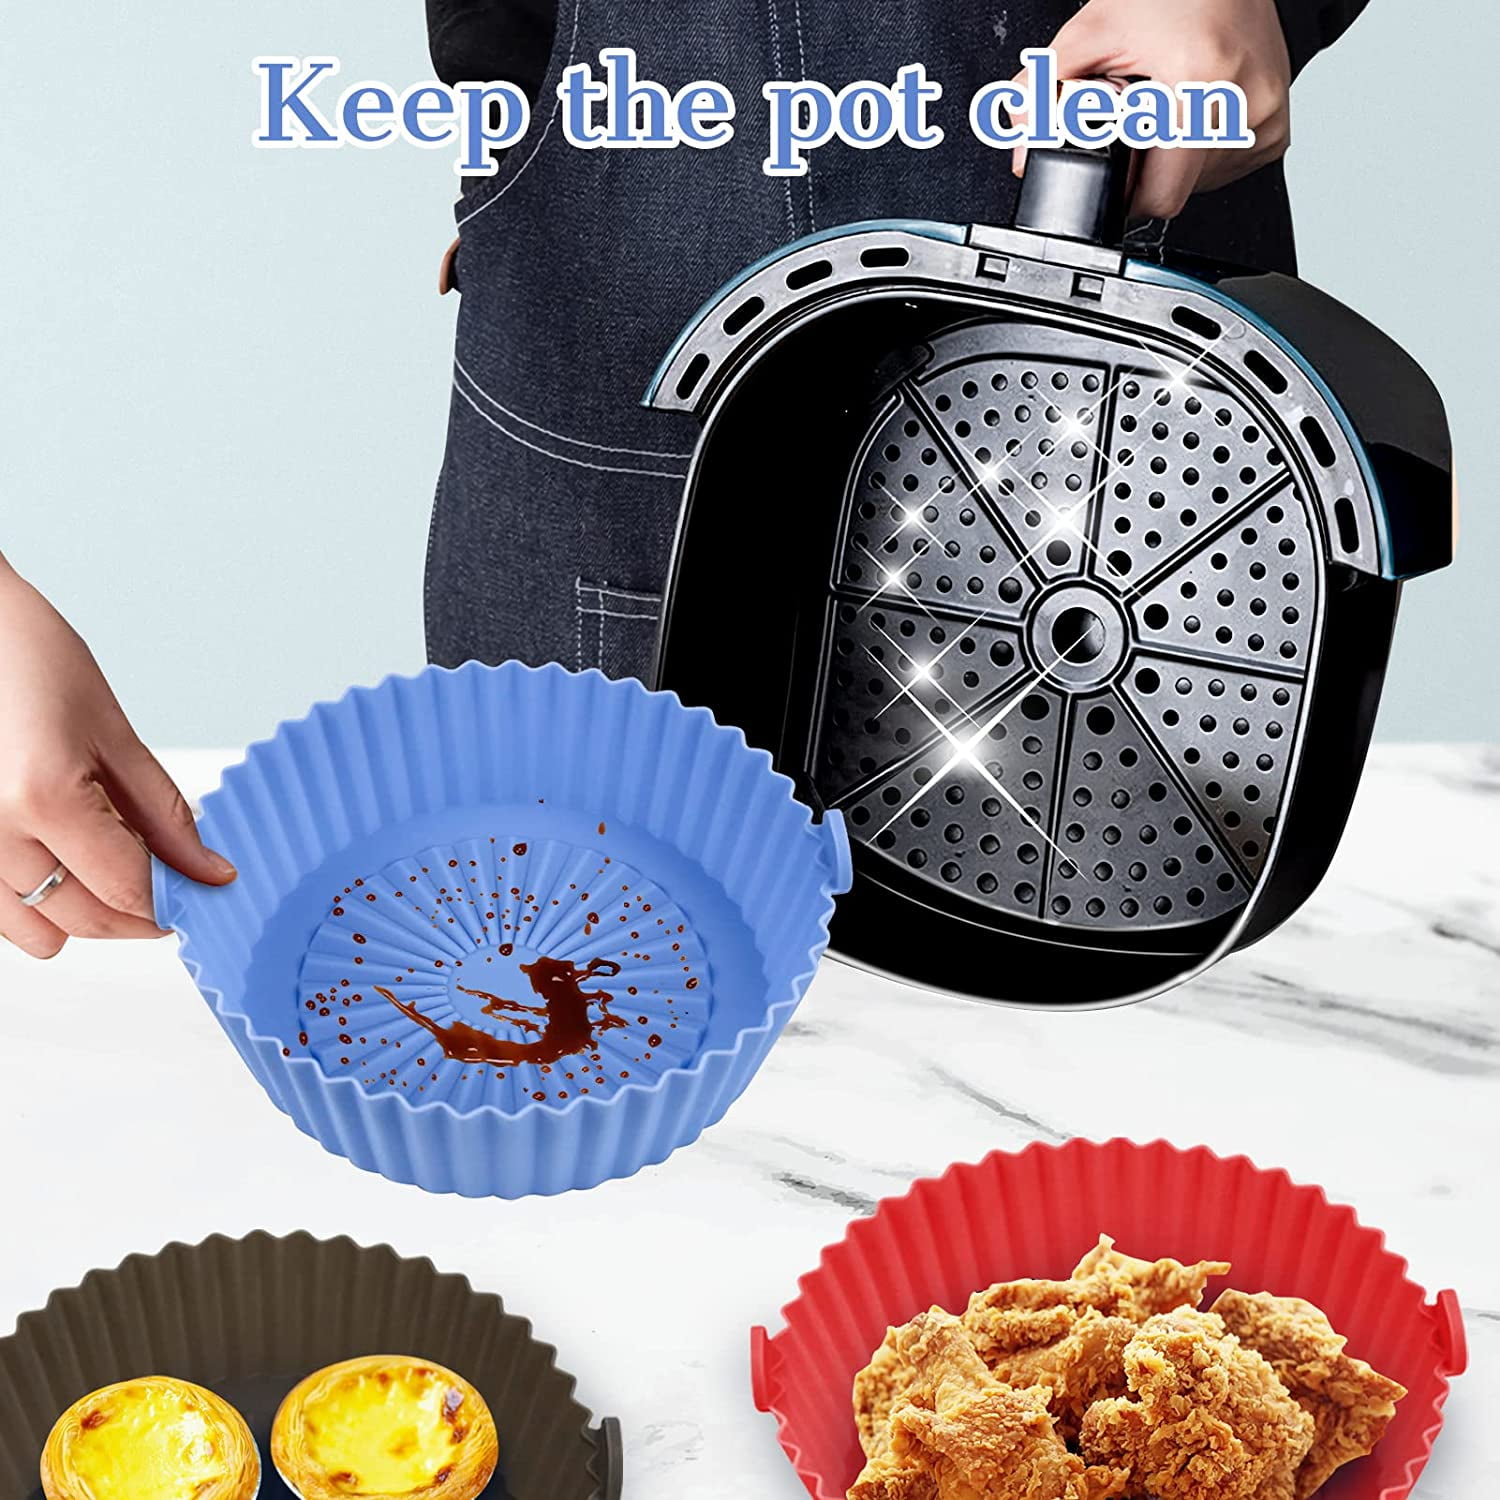 Silicone Pot for Air fryer - stuffsnshop